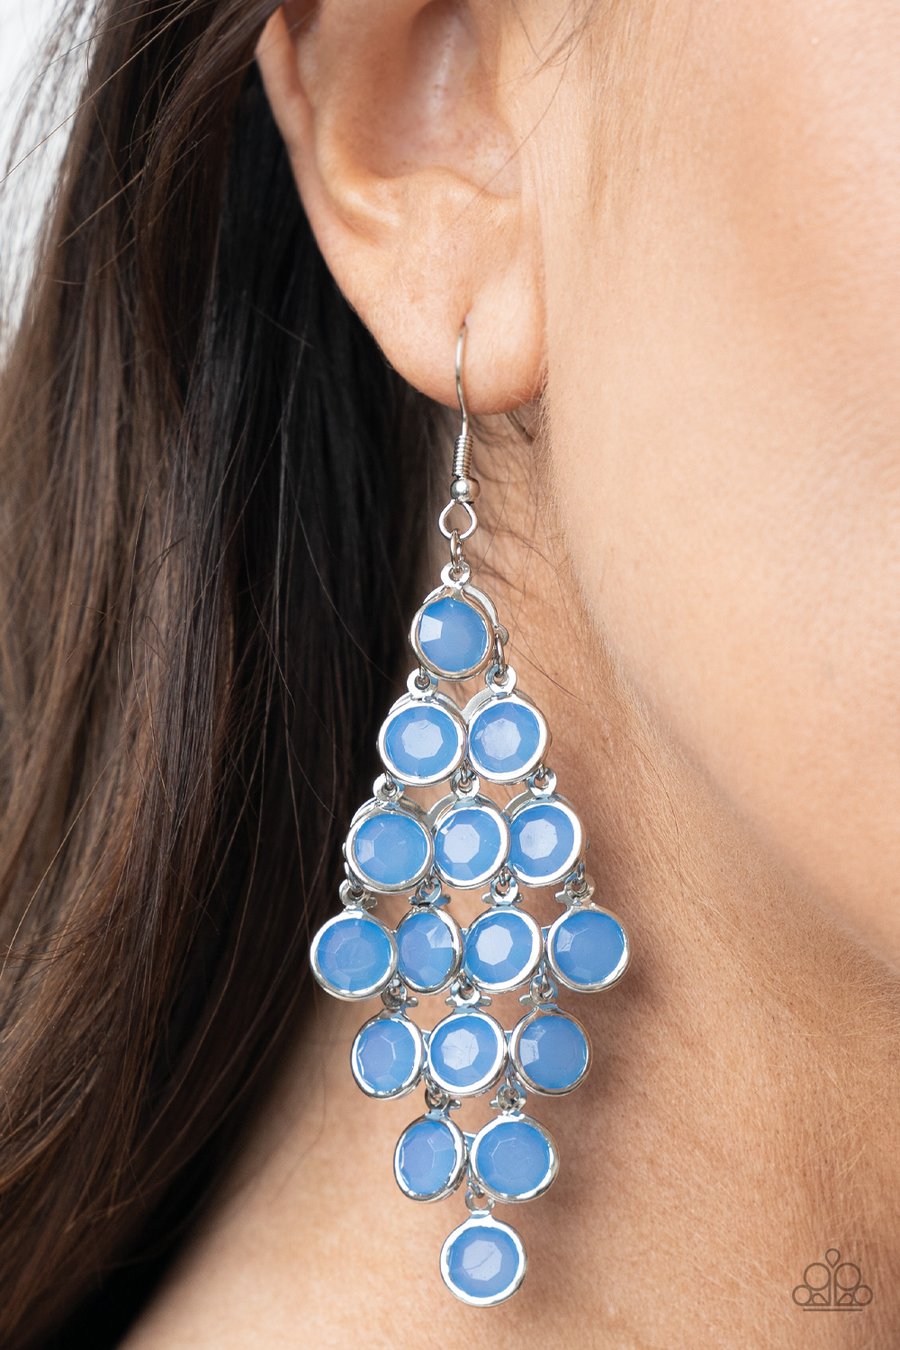 Paparazzi - With All DEW Respect - Blue Earrings